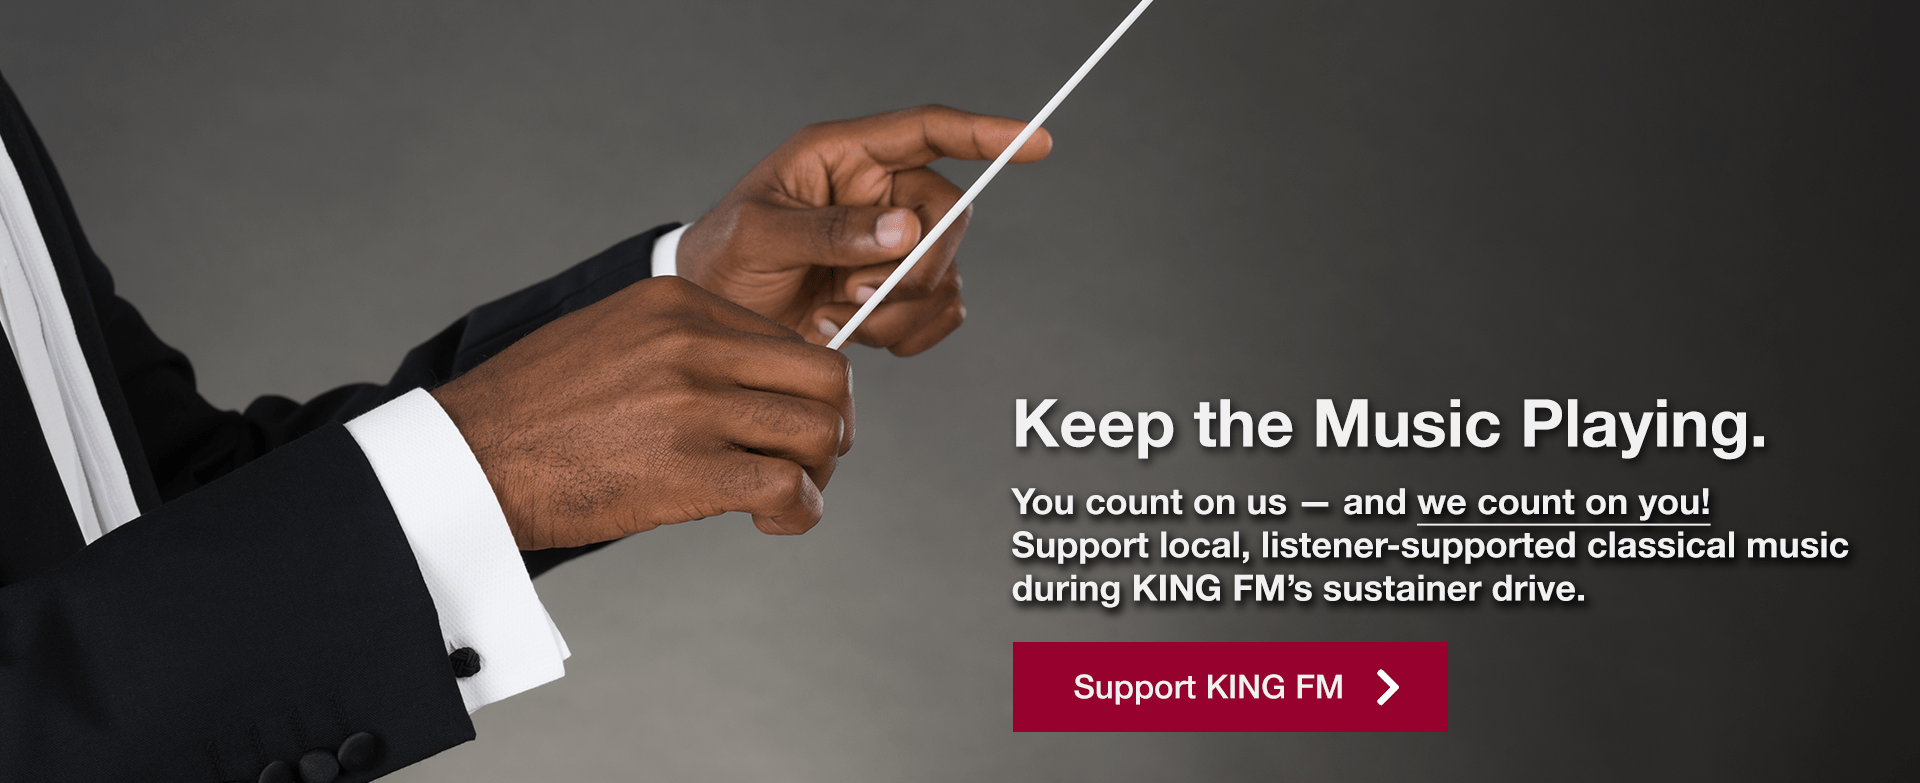 [image of conductor holding a baton] Keep the Music Playing. You count on us — and we count on you! Support local, listener-supported classical music during KING FM's sustainer drive. | Support KING FM »